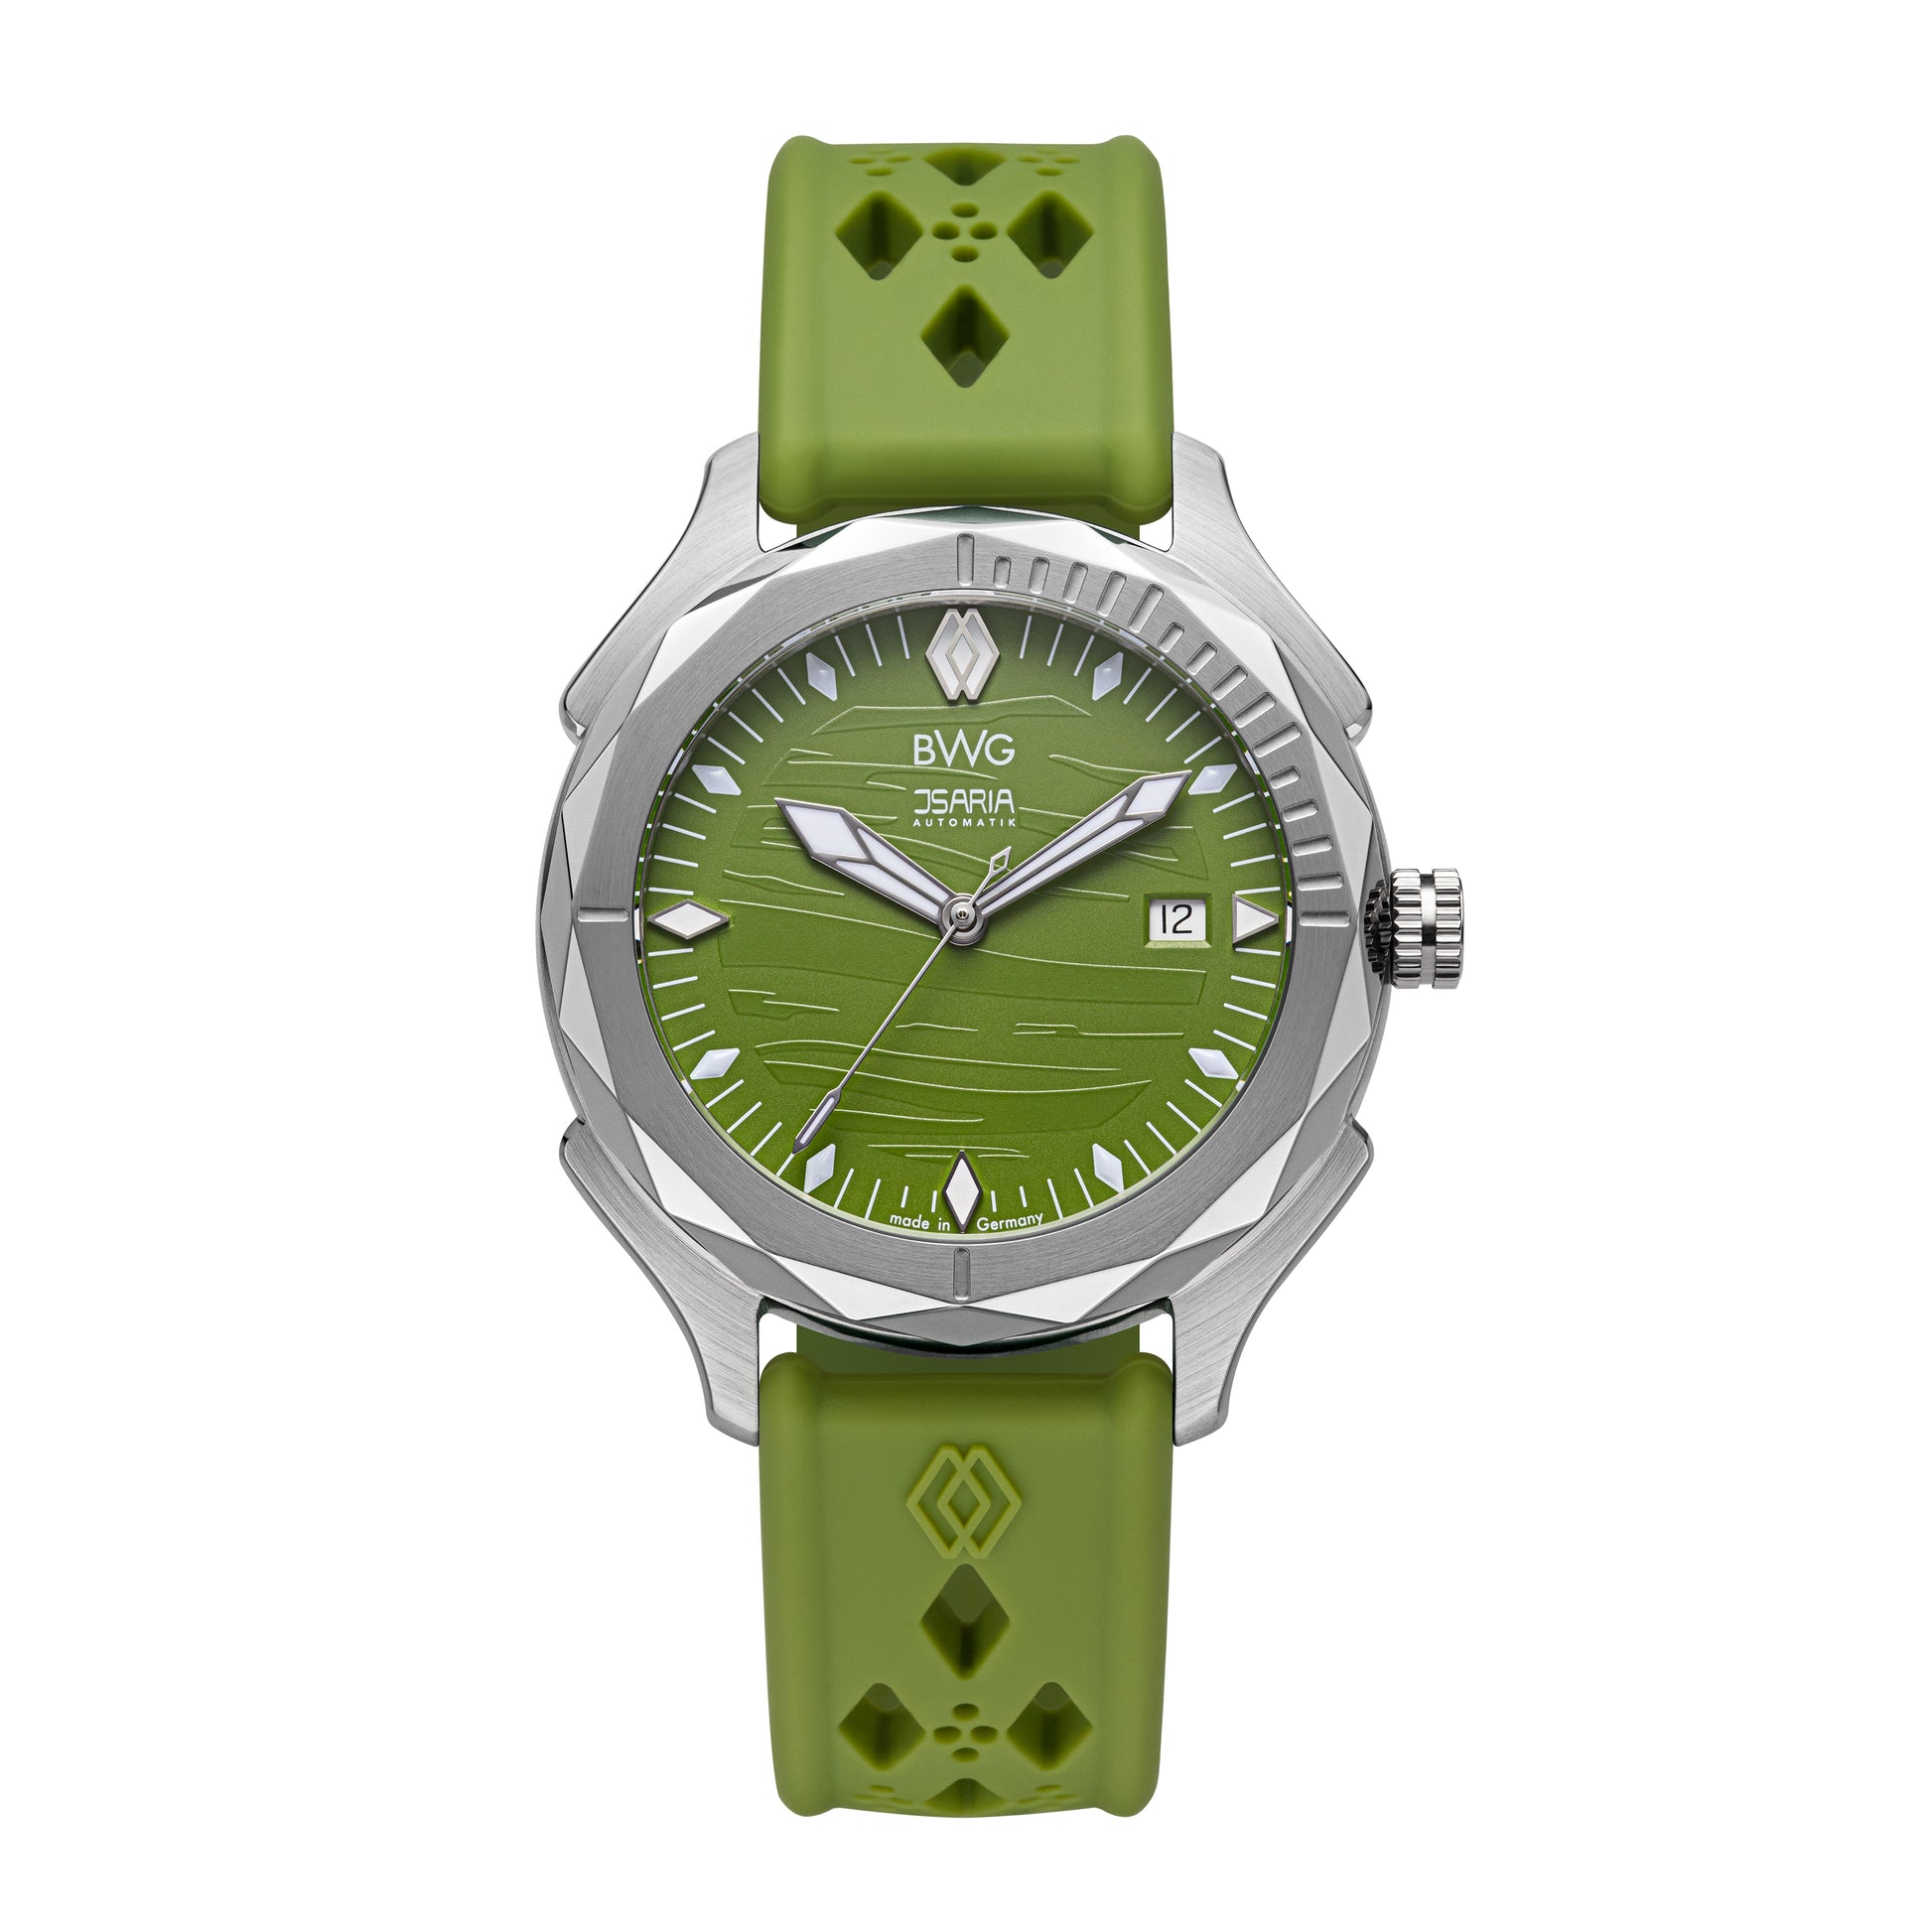 BWG-ISARIA-Automatic-watch-Swiss-Movement-Landeron-L24-manufacture-isar-green-front